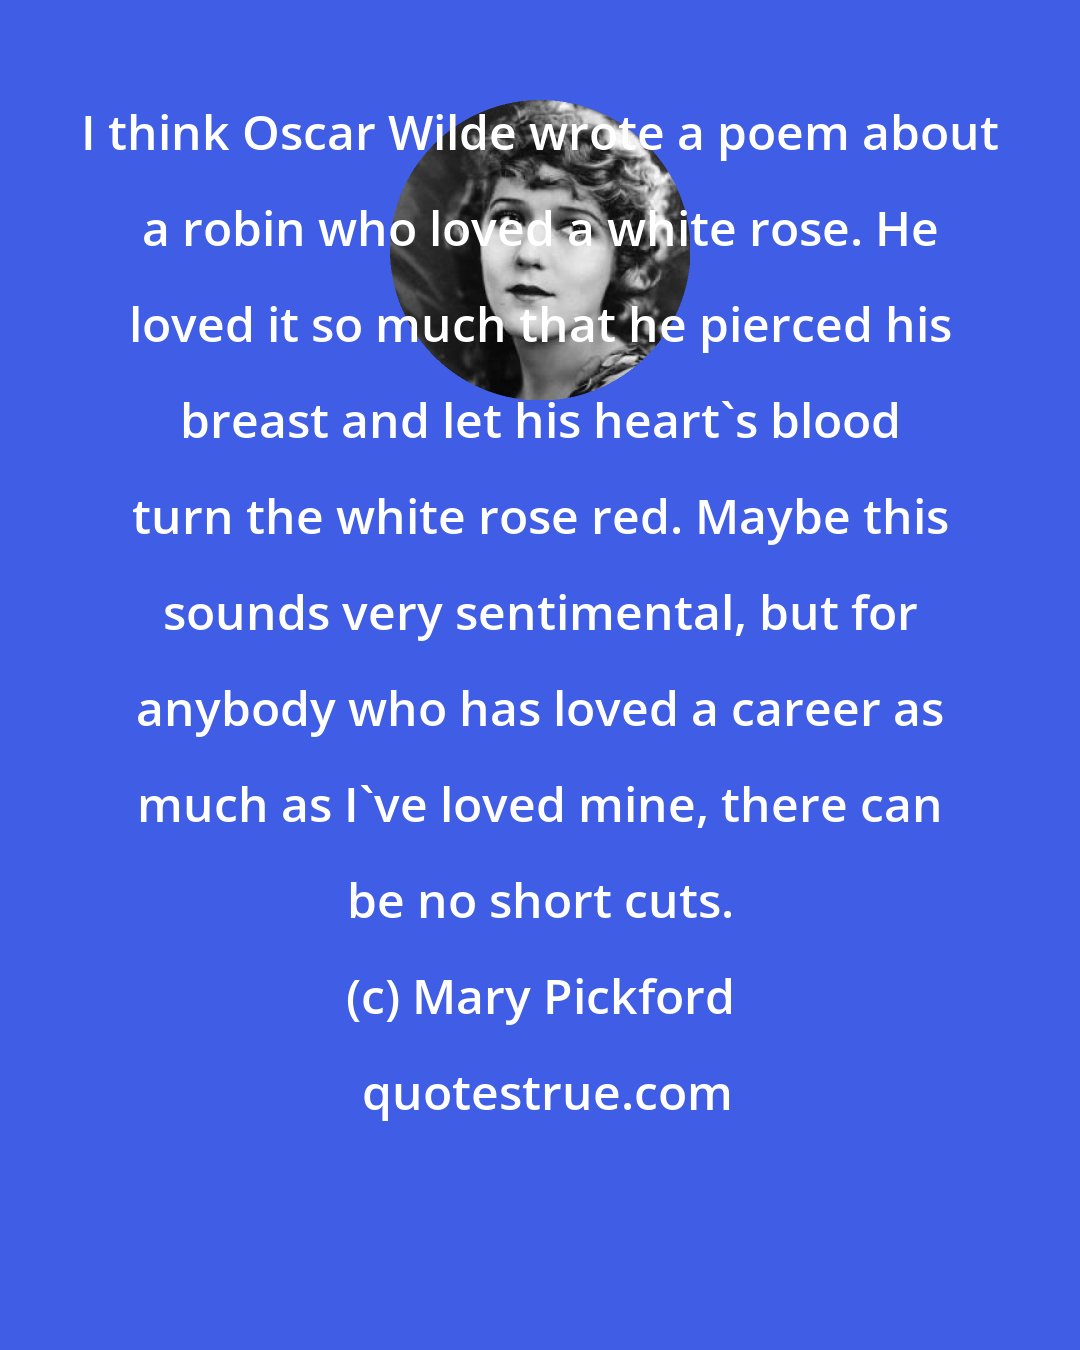 Mary Pickford: I think Oscar Wilde wrote a poem about a robin who loved a white rose. He loved it so much that he pierced his breast and let his heart's blood turn the white rose red. Maybe this sounds very sentimental, but for anybody who has loved a career as much as I've loved mine, there can be no short cuts.